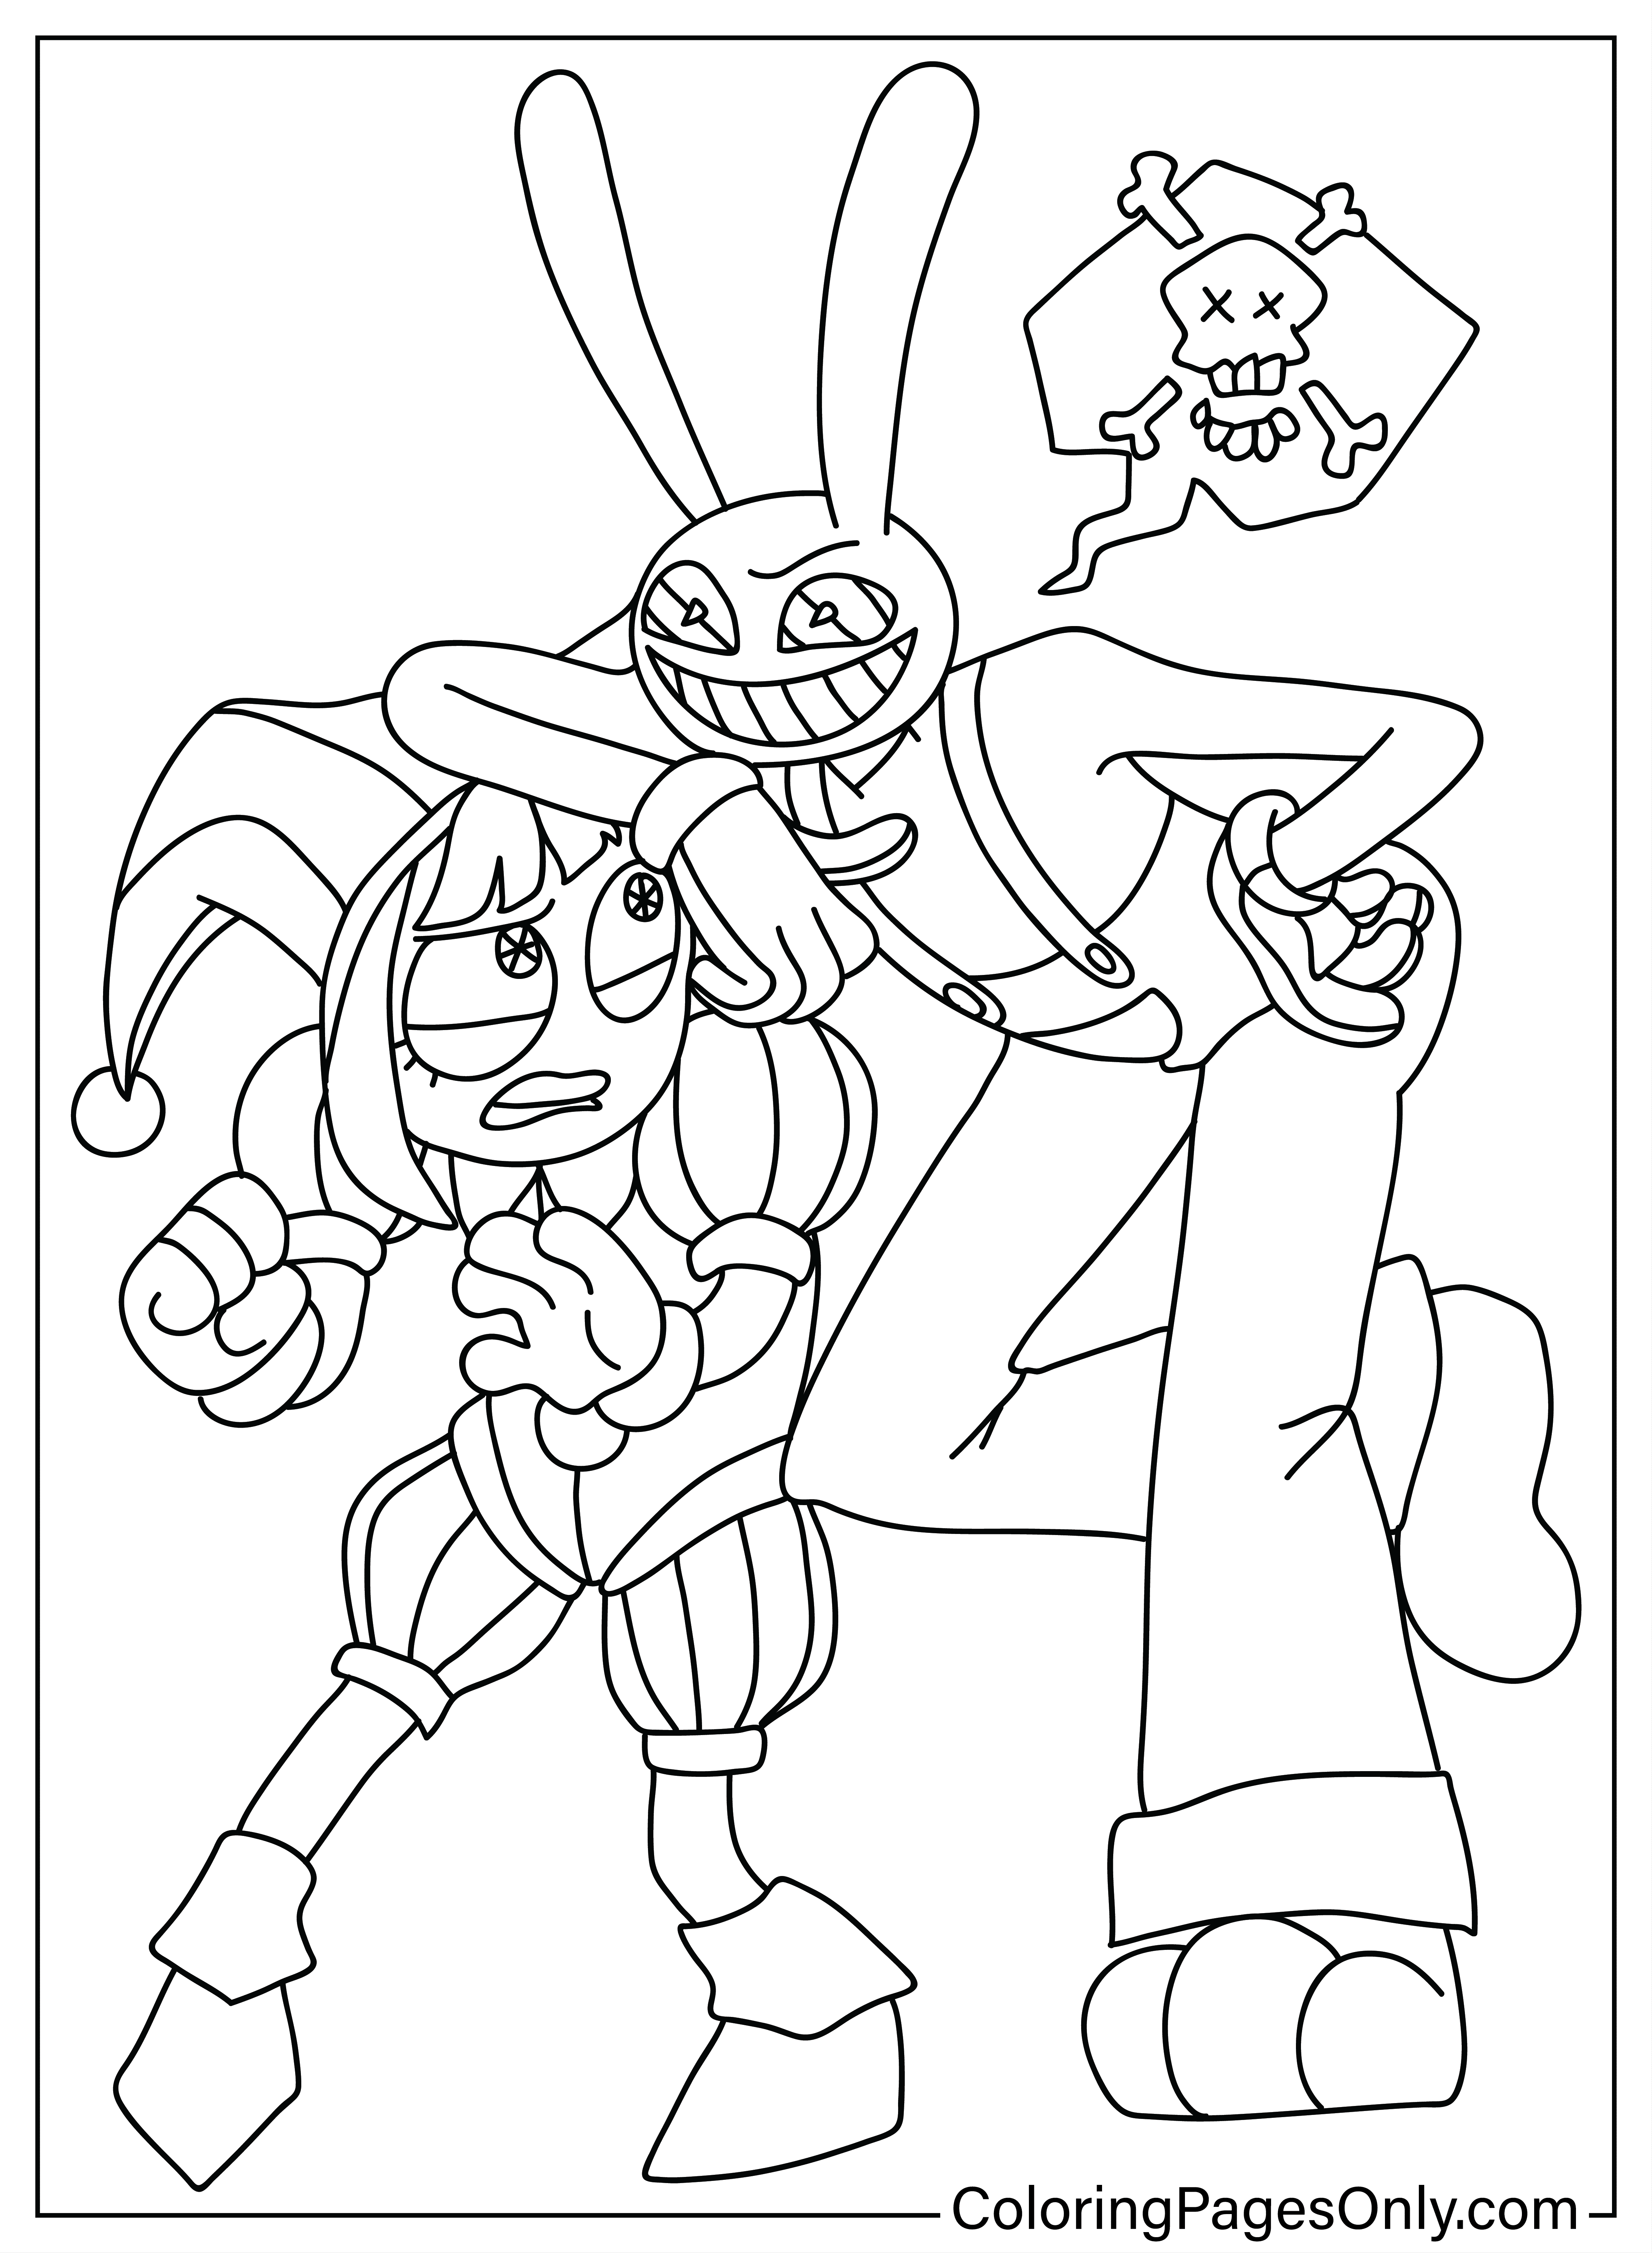 Pomni and Jax Coloring Page from Pomni